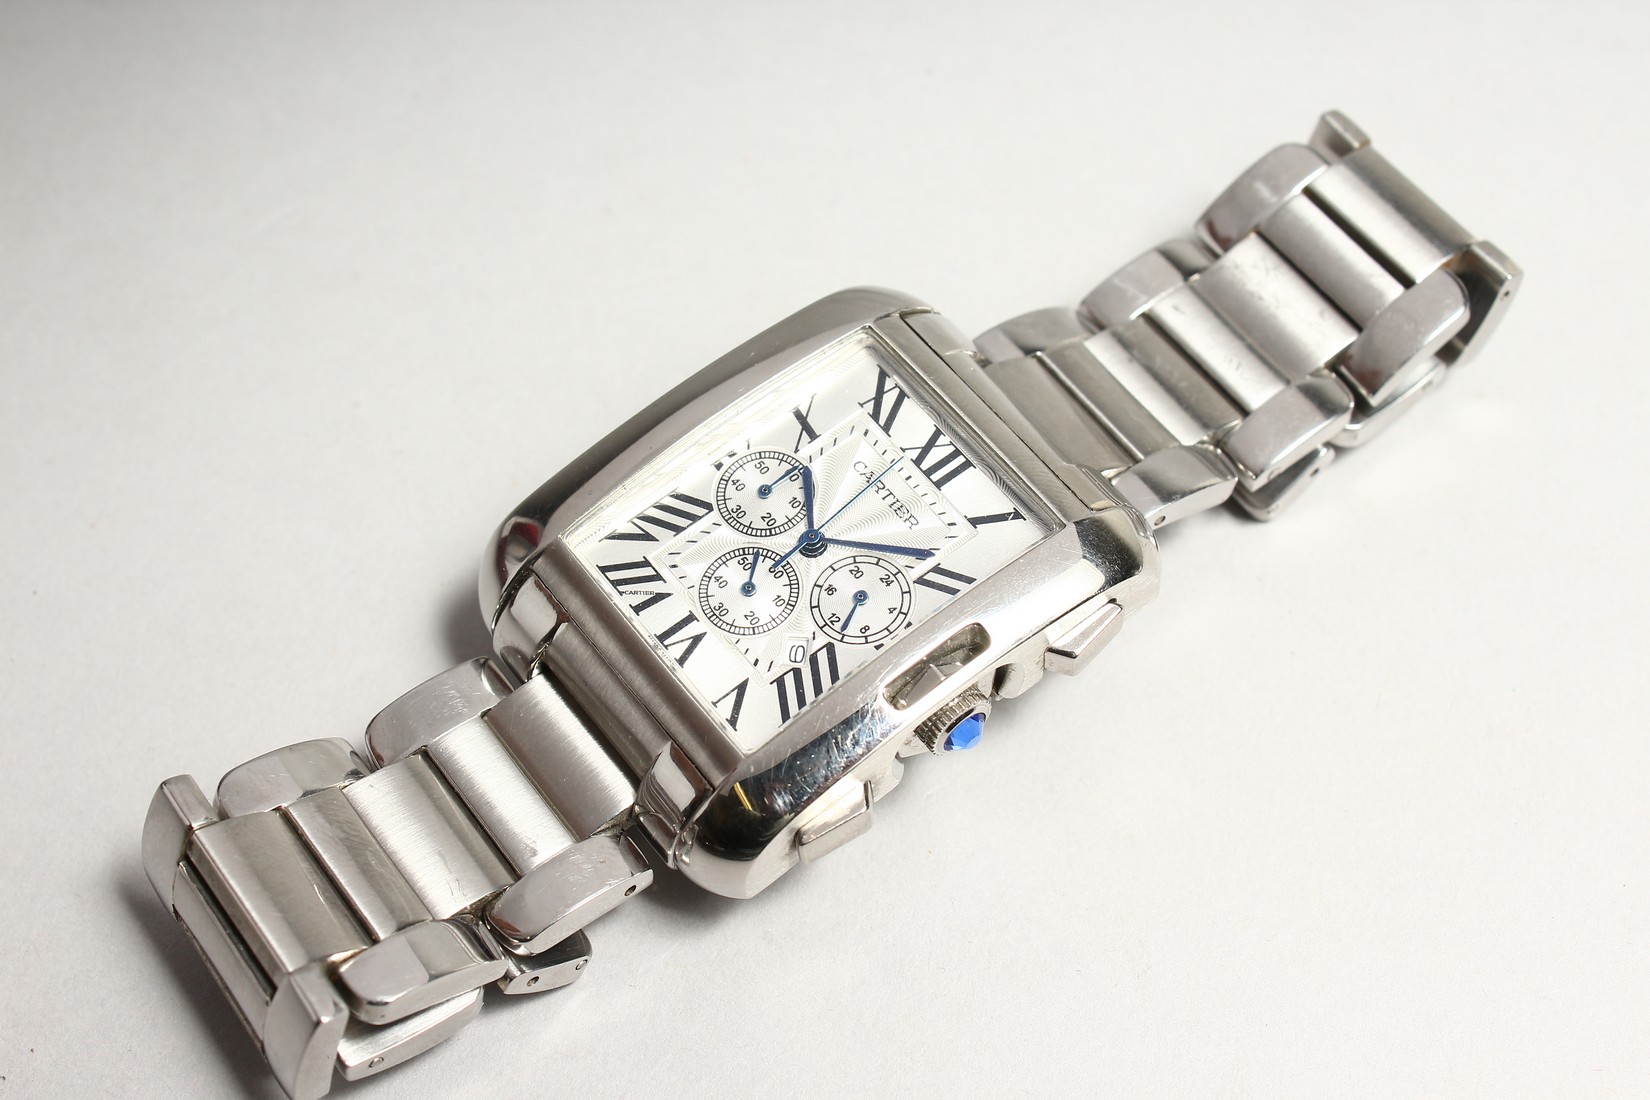 A CARTIER CHRONGRAPIA STAINLESS STEEL WATCH AND BRACELET. - Image 2 of 7